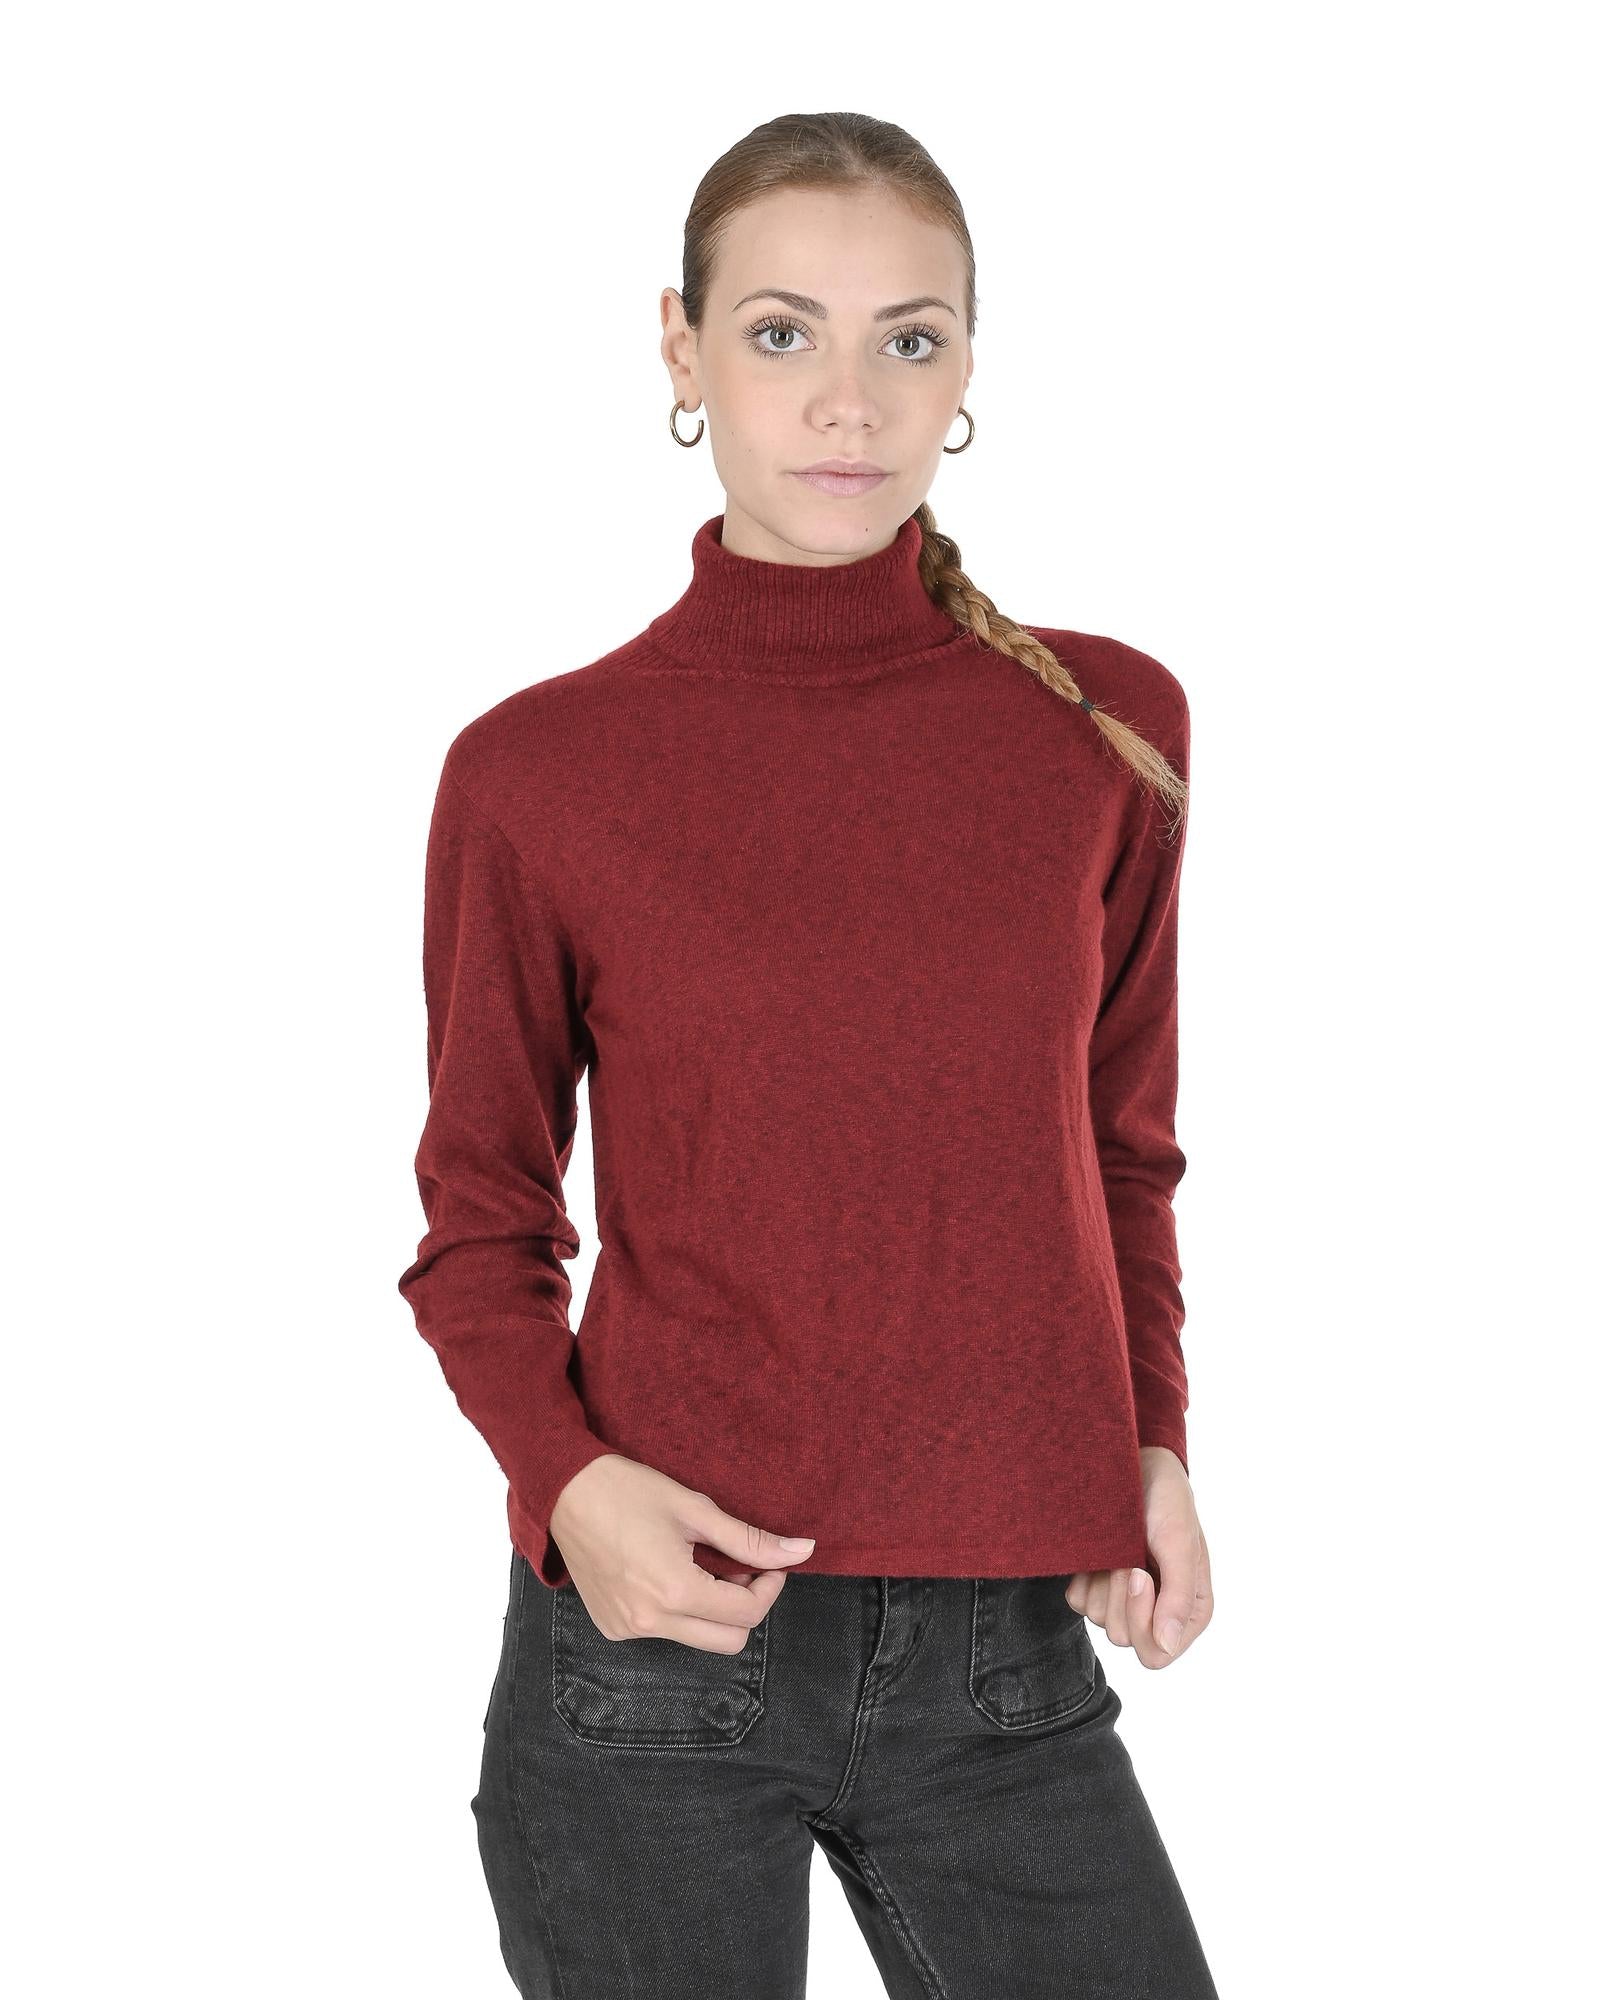 Cashmere Turtleneck Sweater Made in Italy - M